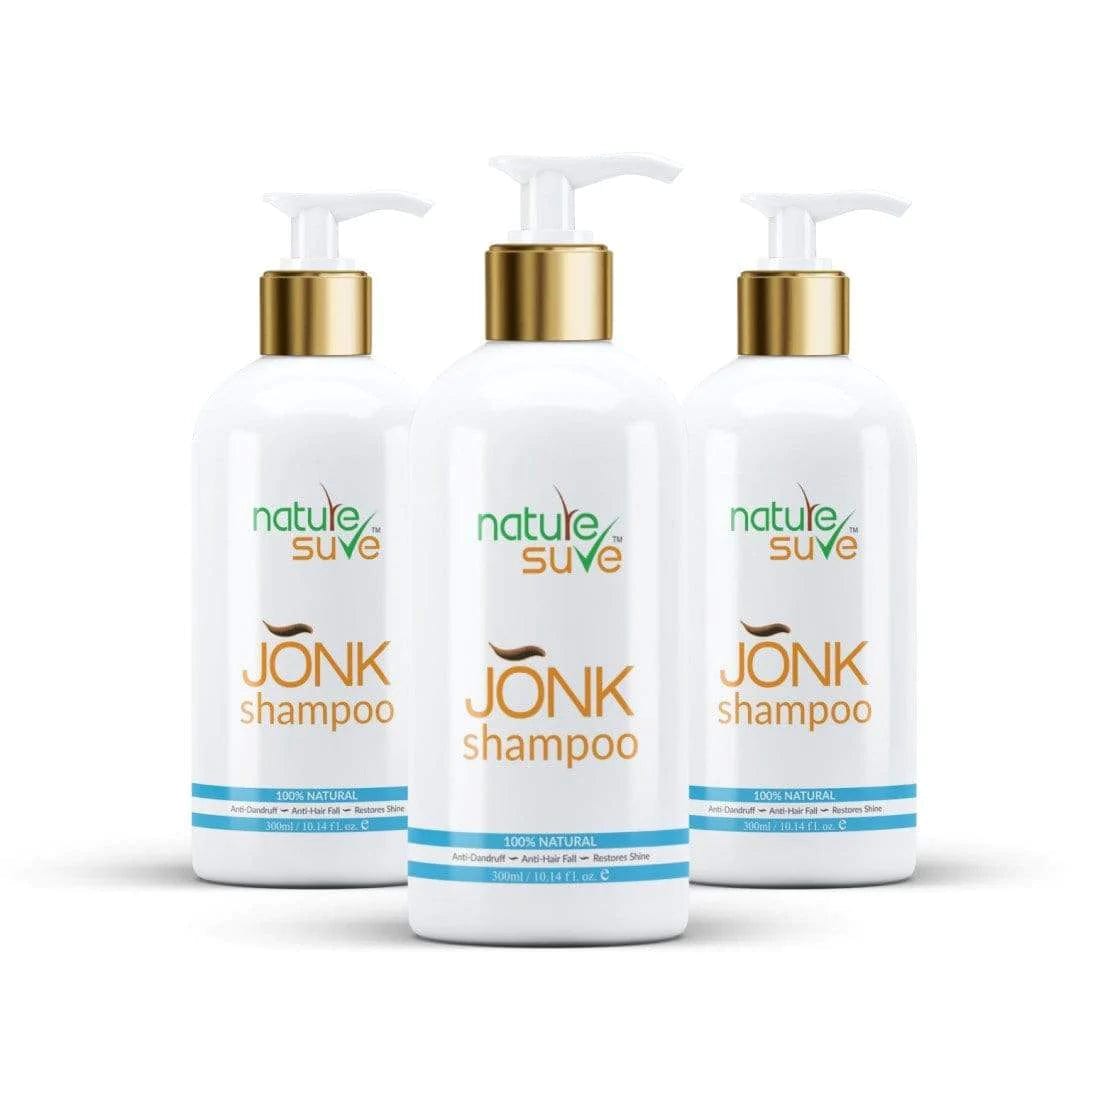 Nature Sure Pack of 3 Nature Sure Jonk Shampoo Hair Cleanser for Men & Women (300ml)